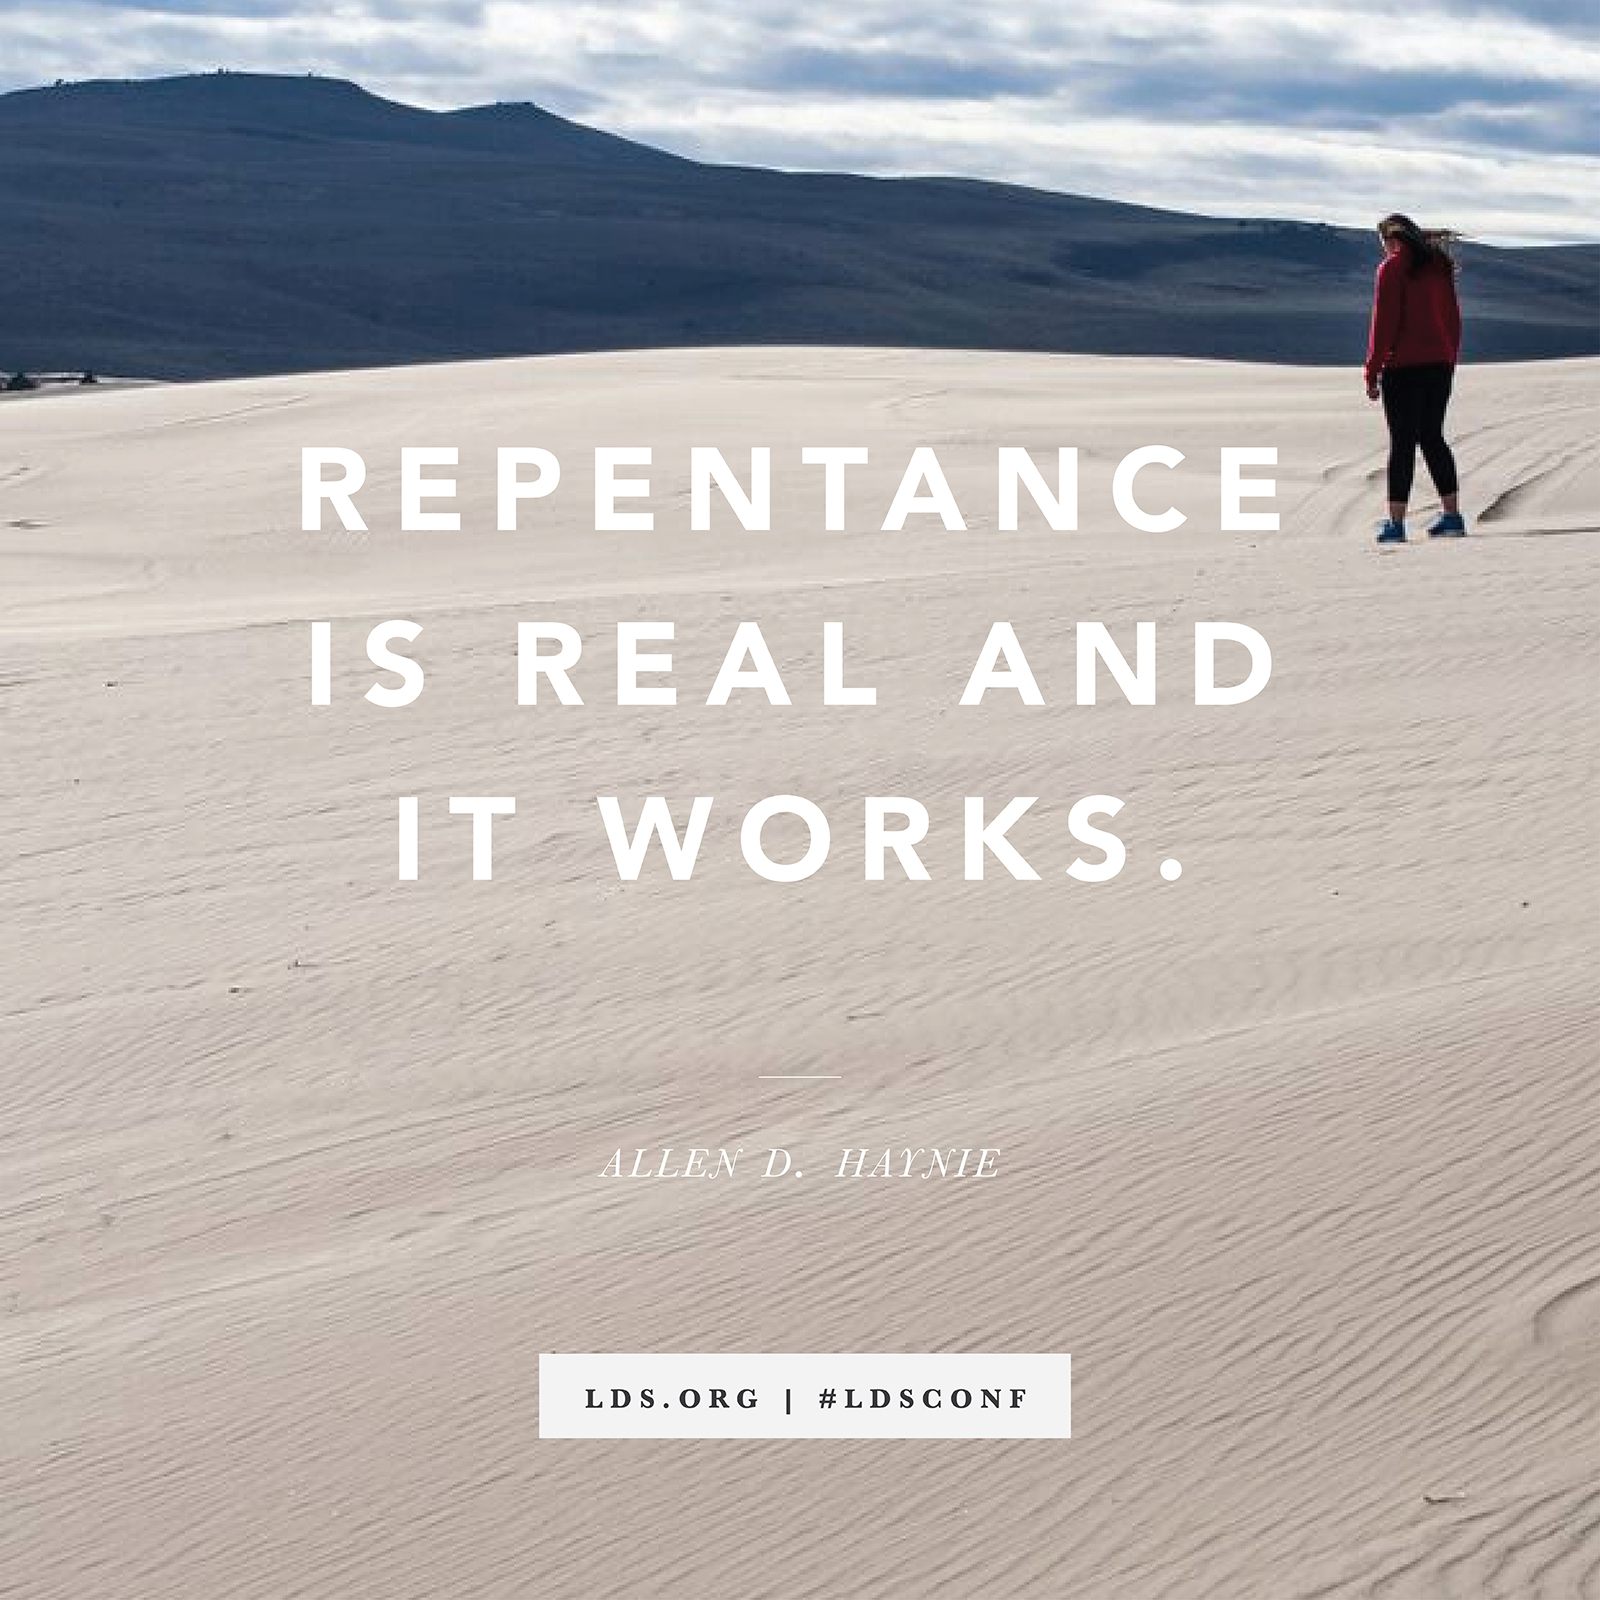 Repentance Works